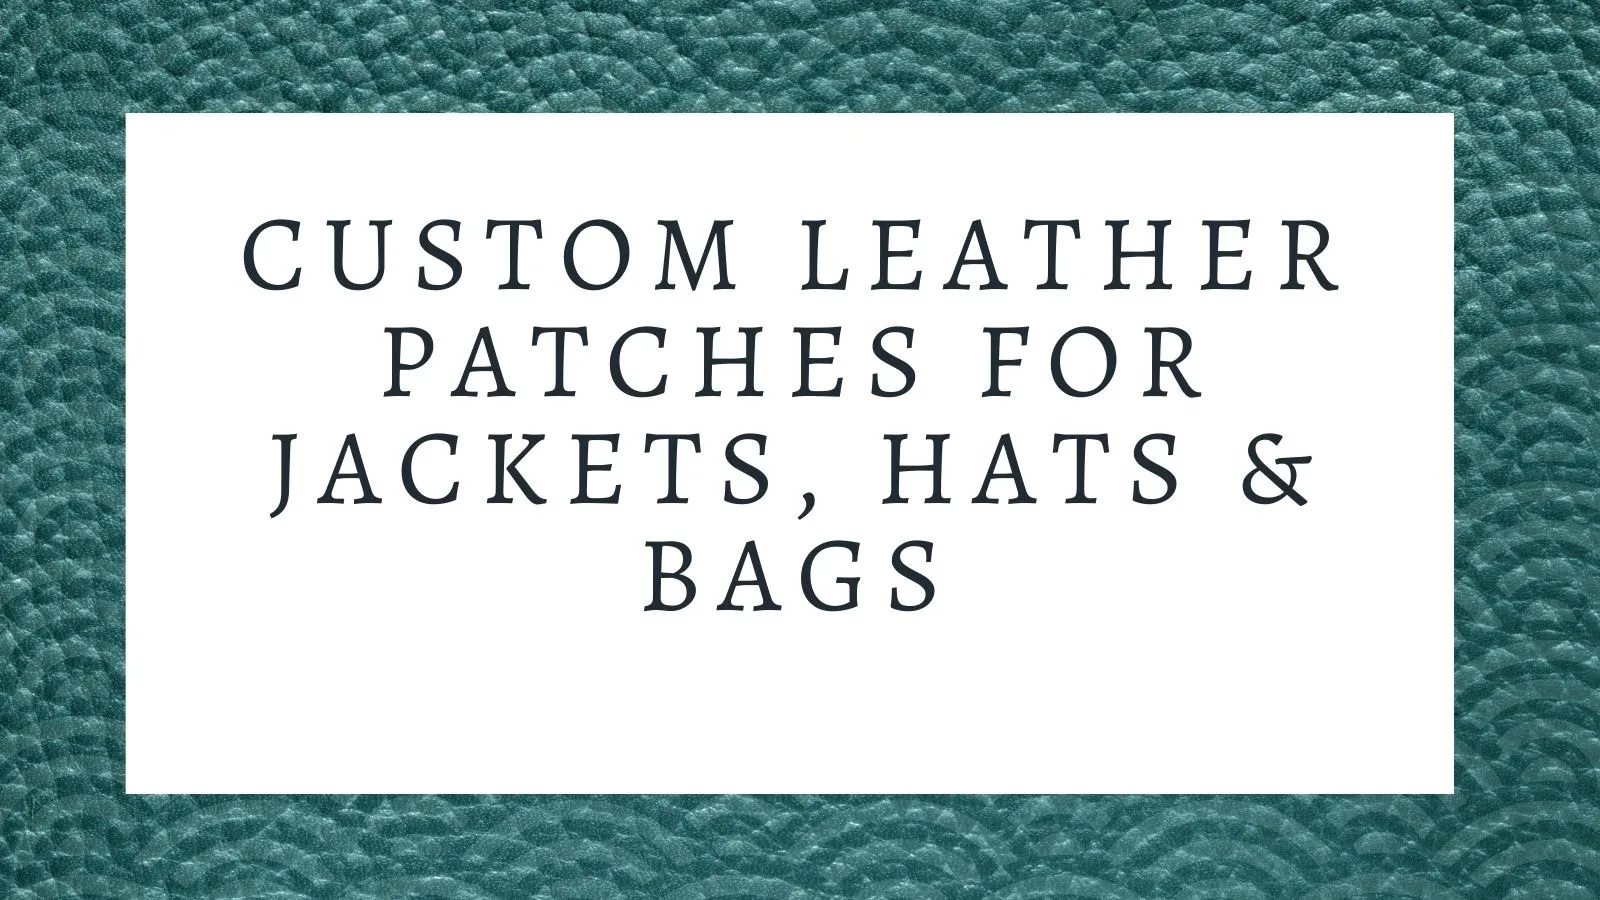 Custom Leather Patches for Jackets, Hats & Bags